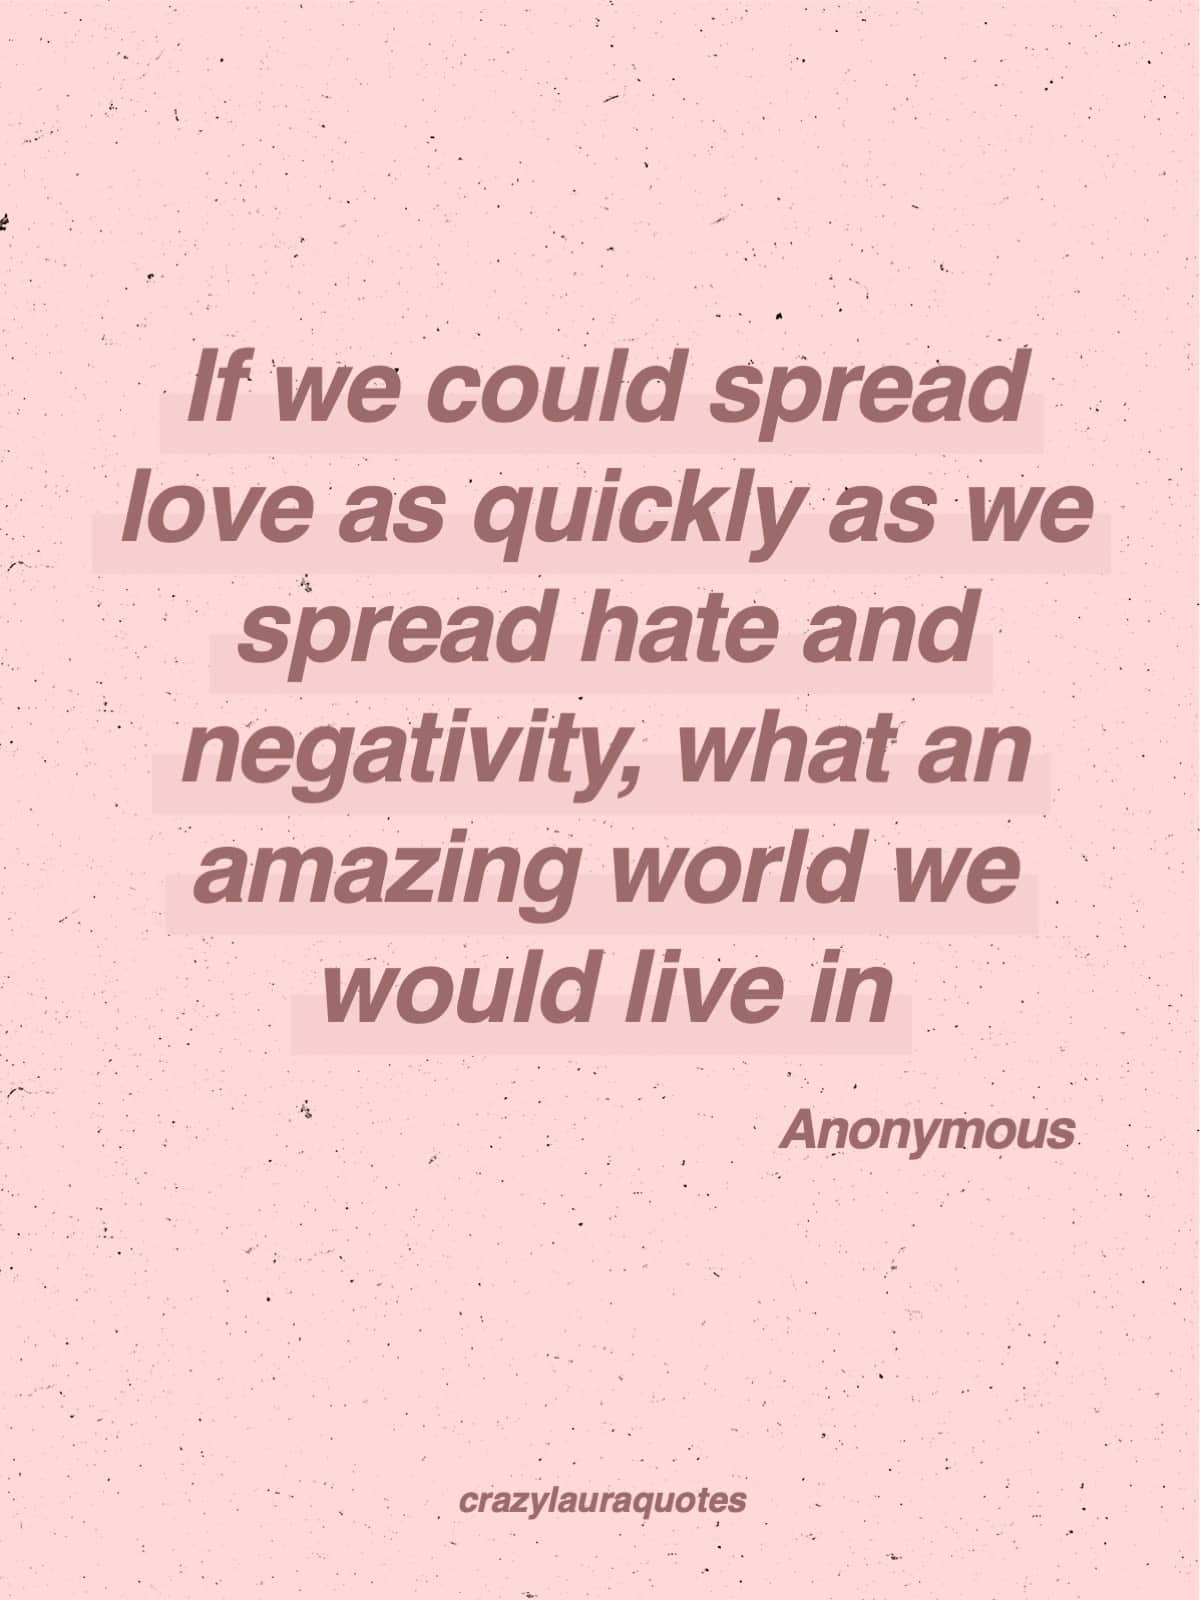 love over hate and negativity quote